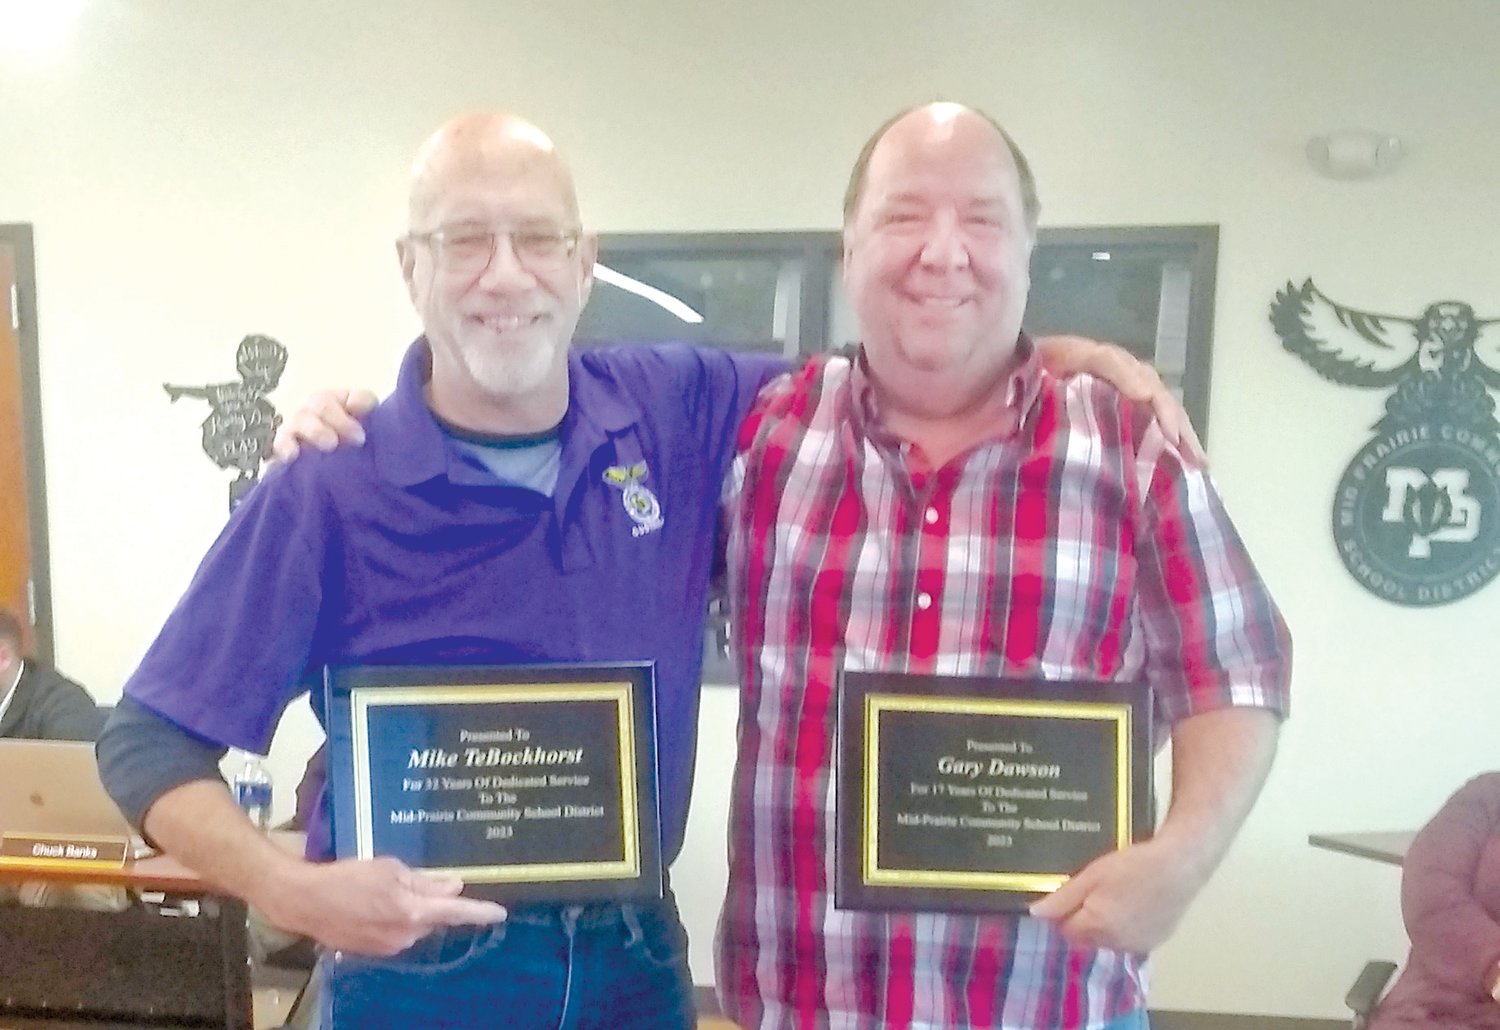 Lead Custodians Mike TeBockhorst, left, and Gary Dawson, received plaques commemorating their years of service from the Mid-Prairie Community School District on March 28.